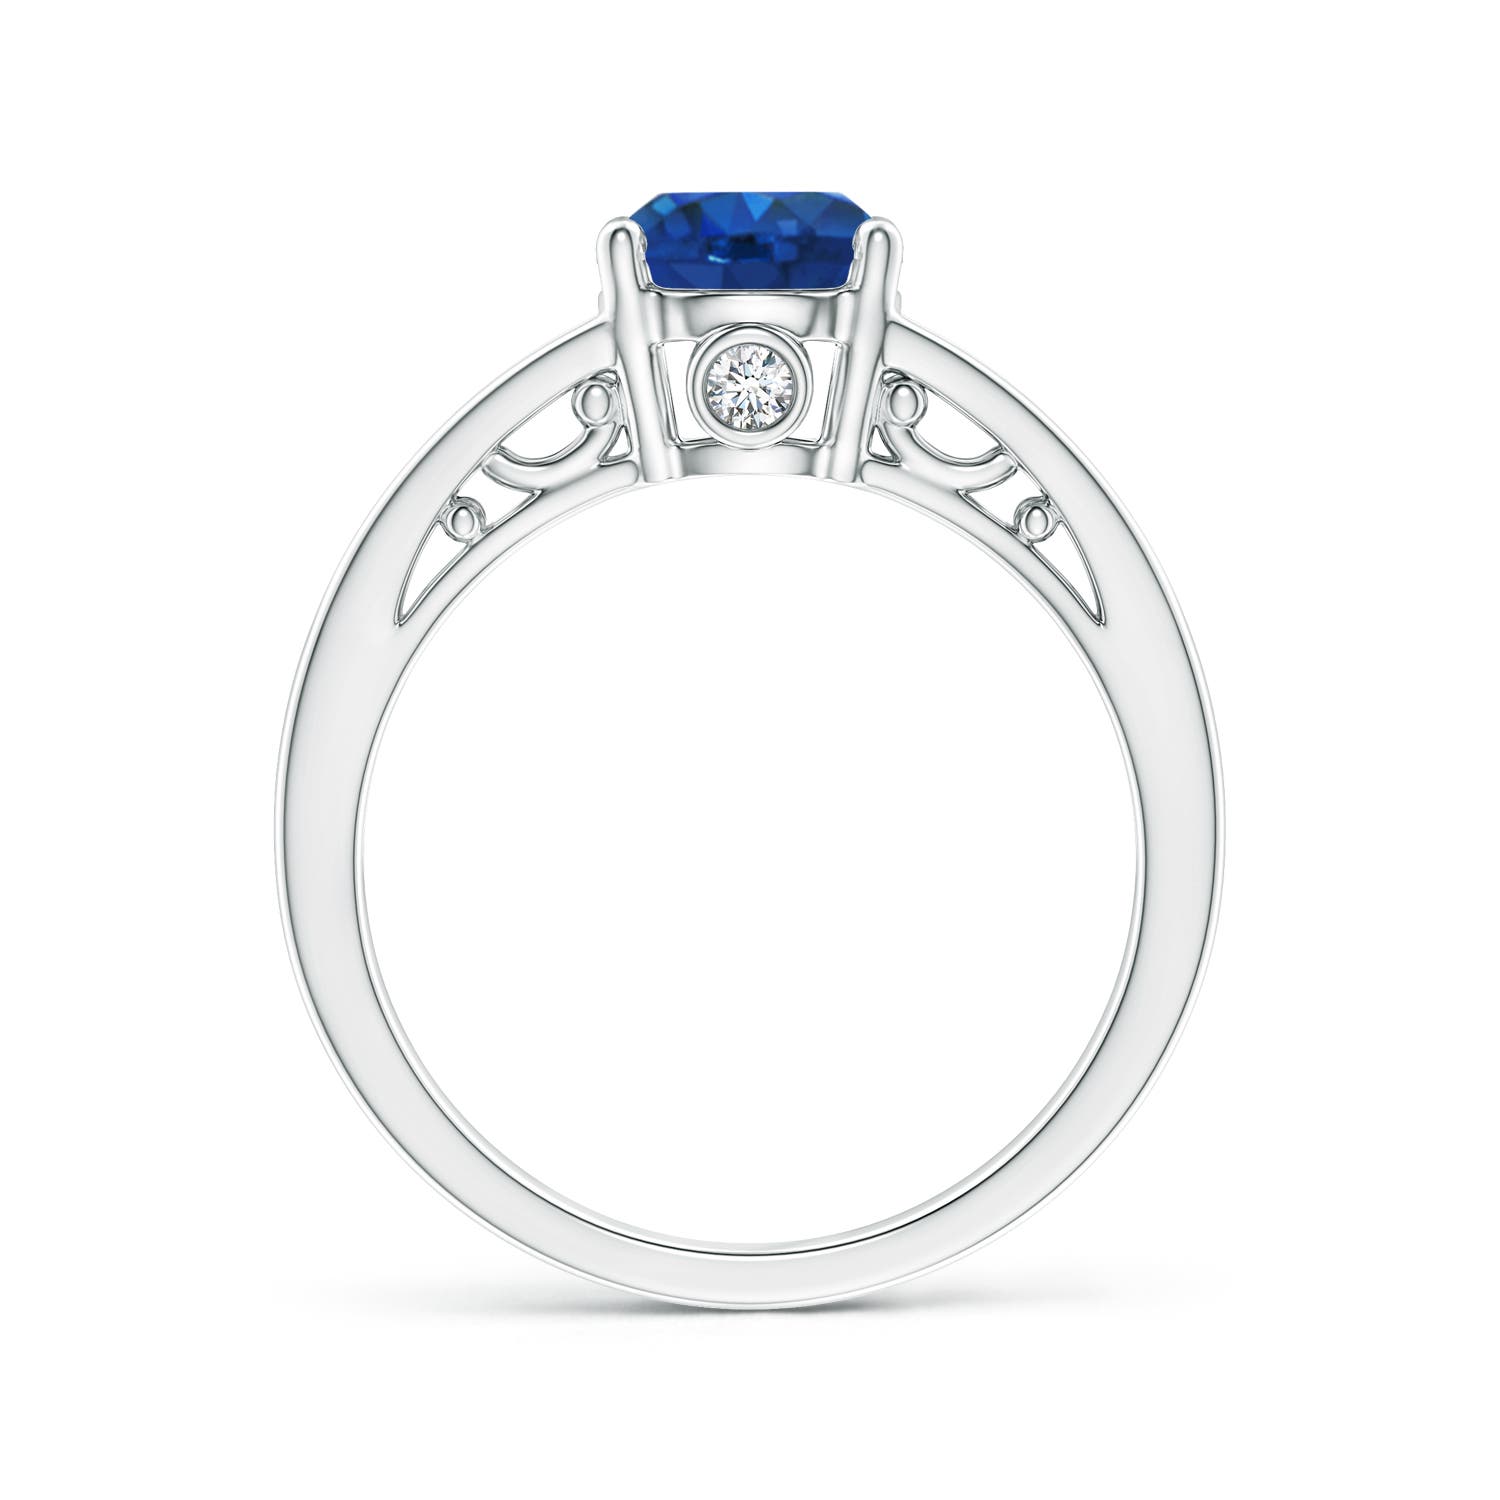 AAA - Blue Sapphire / 1.67 CT / 14 KT White Gold